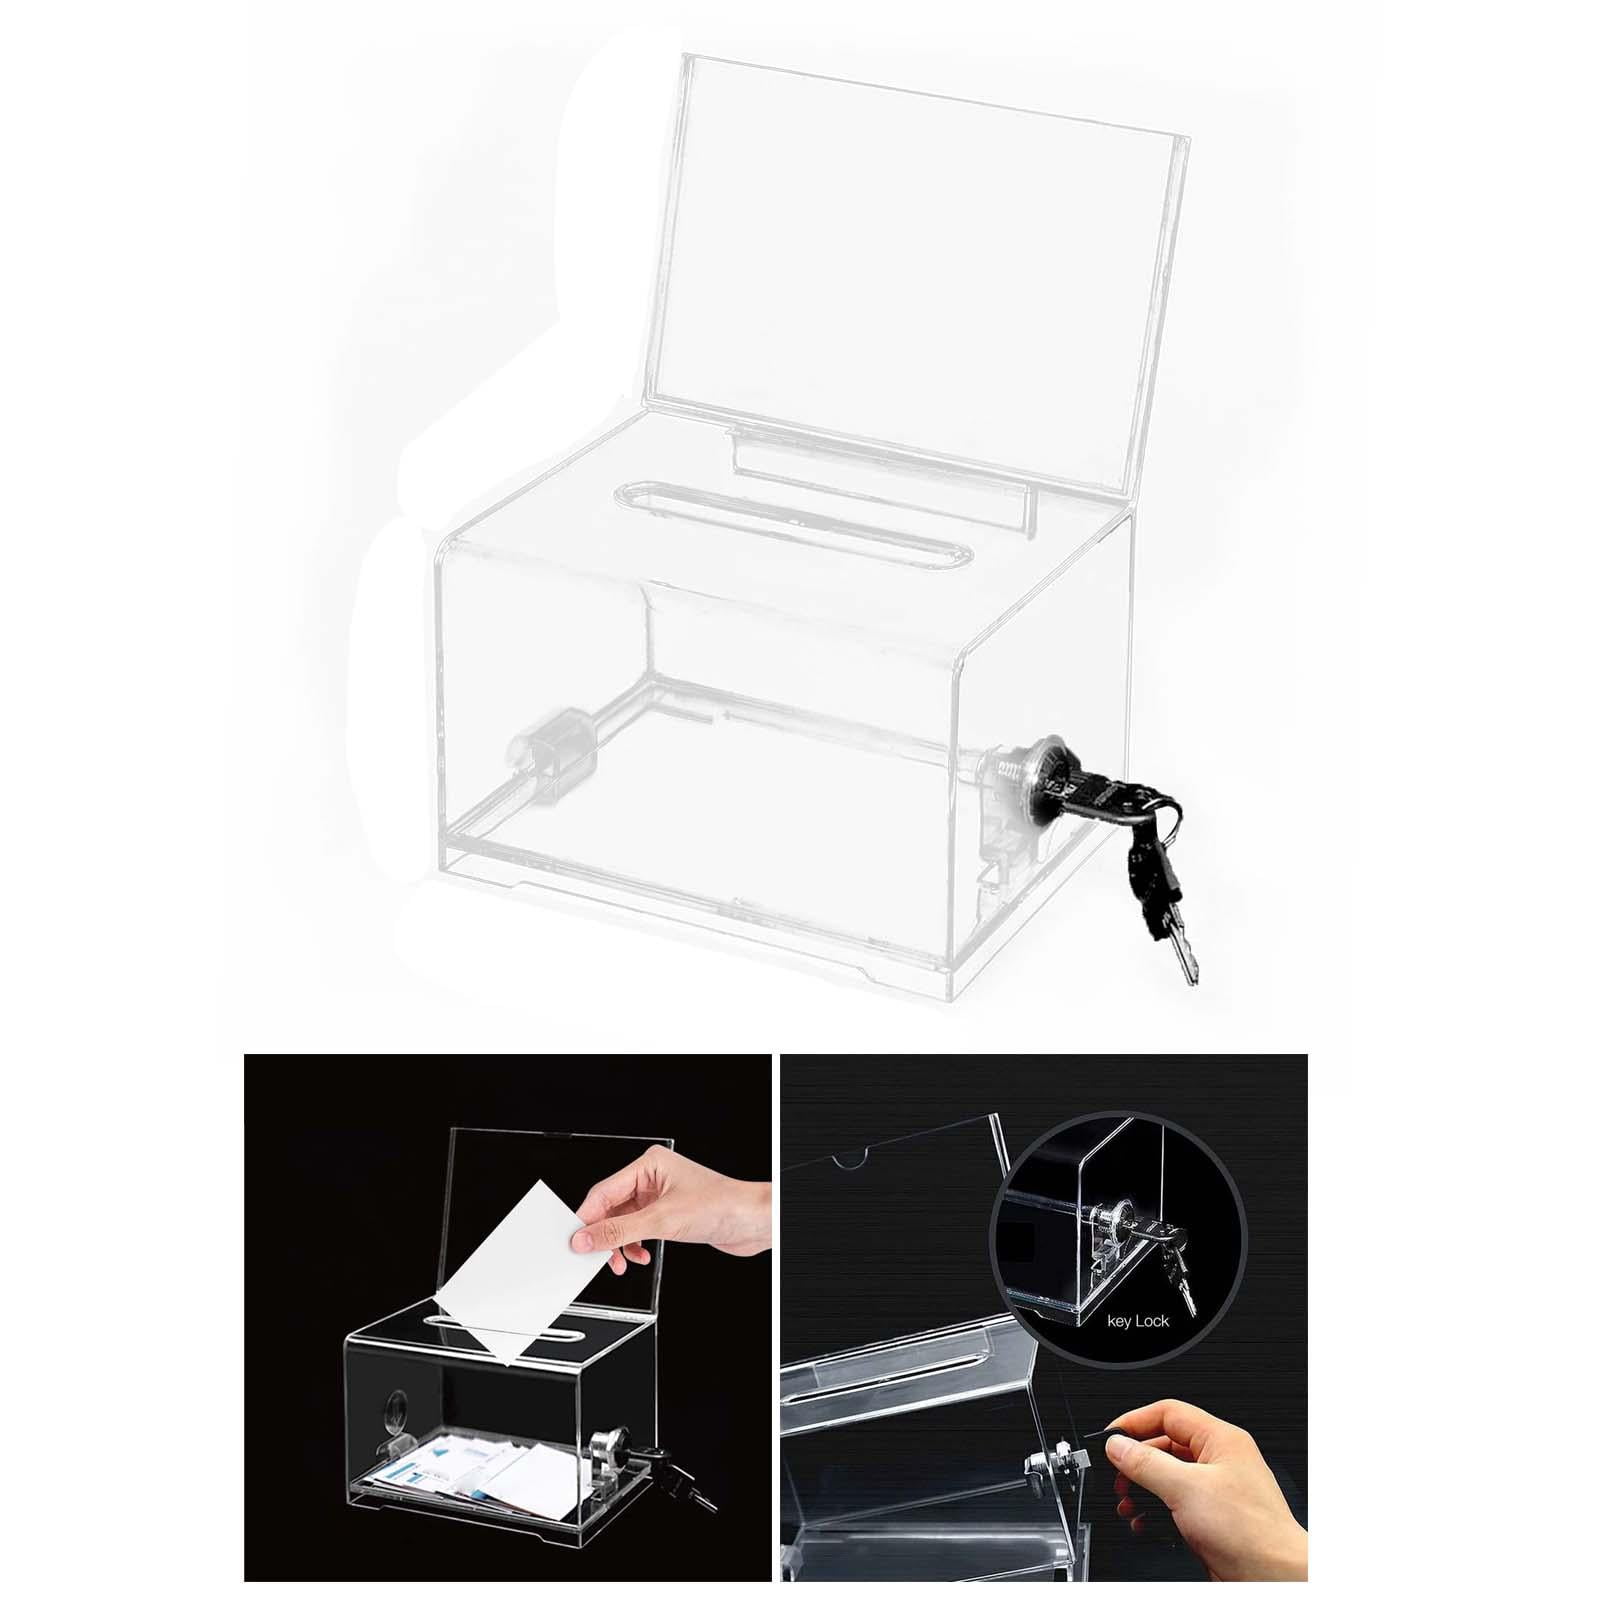 Marketing Holders 12 Inch Locking Ballot Box Clear Acrylic Square Cube Top  Locking See Through Countertop Contests Entry or Collection Bin